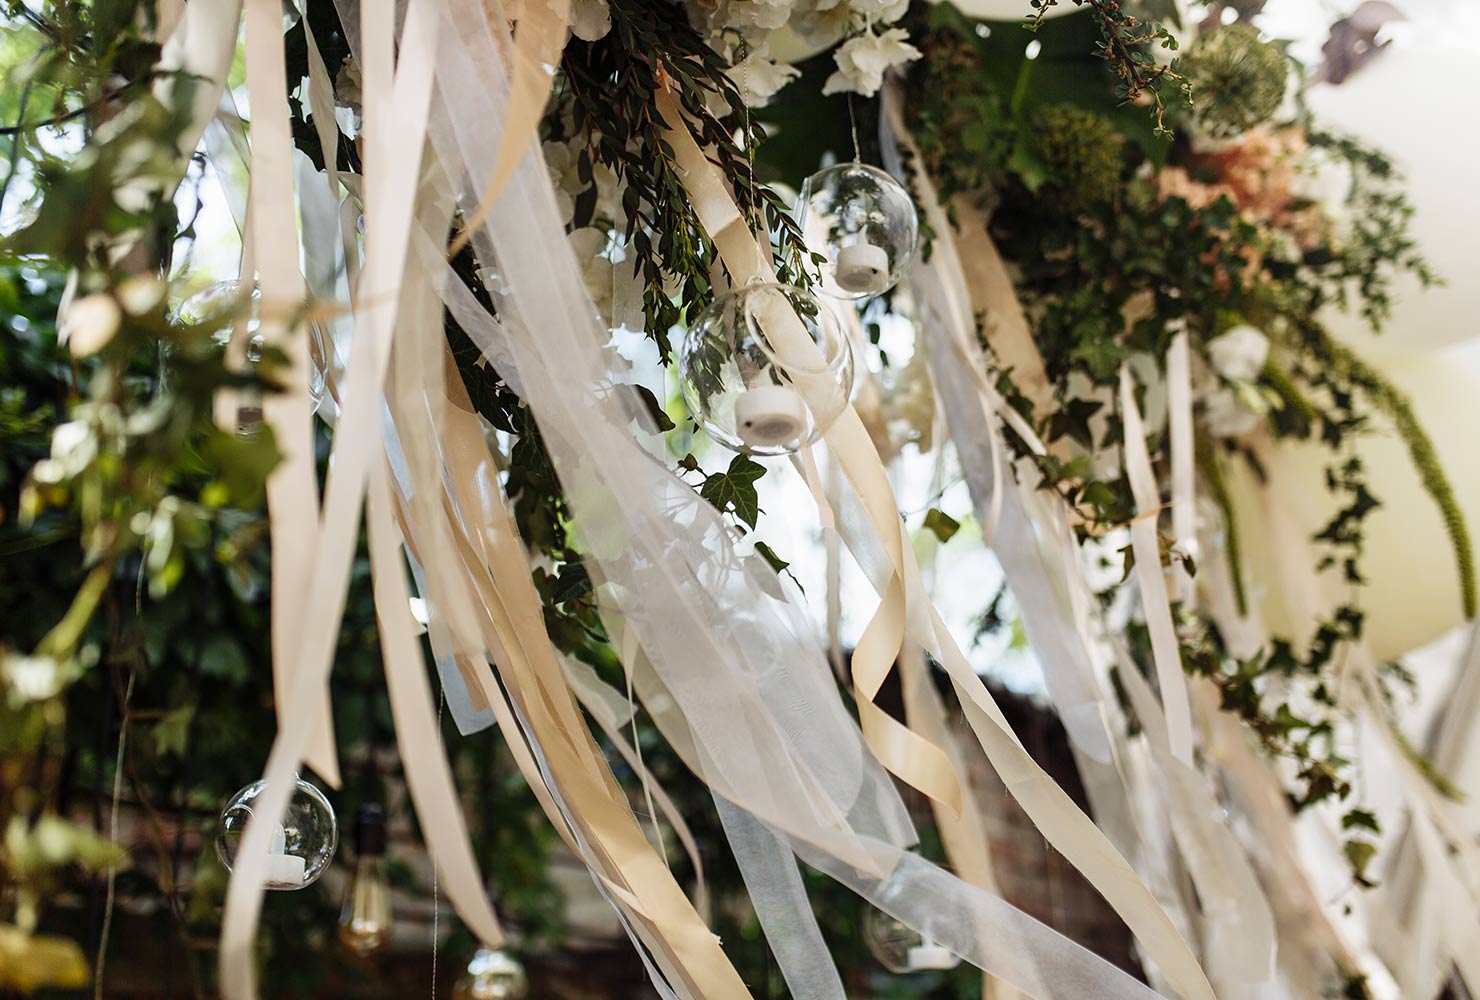 Garland and greenery hanging from wedding arch.